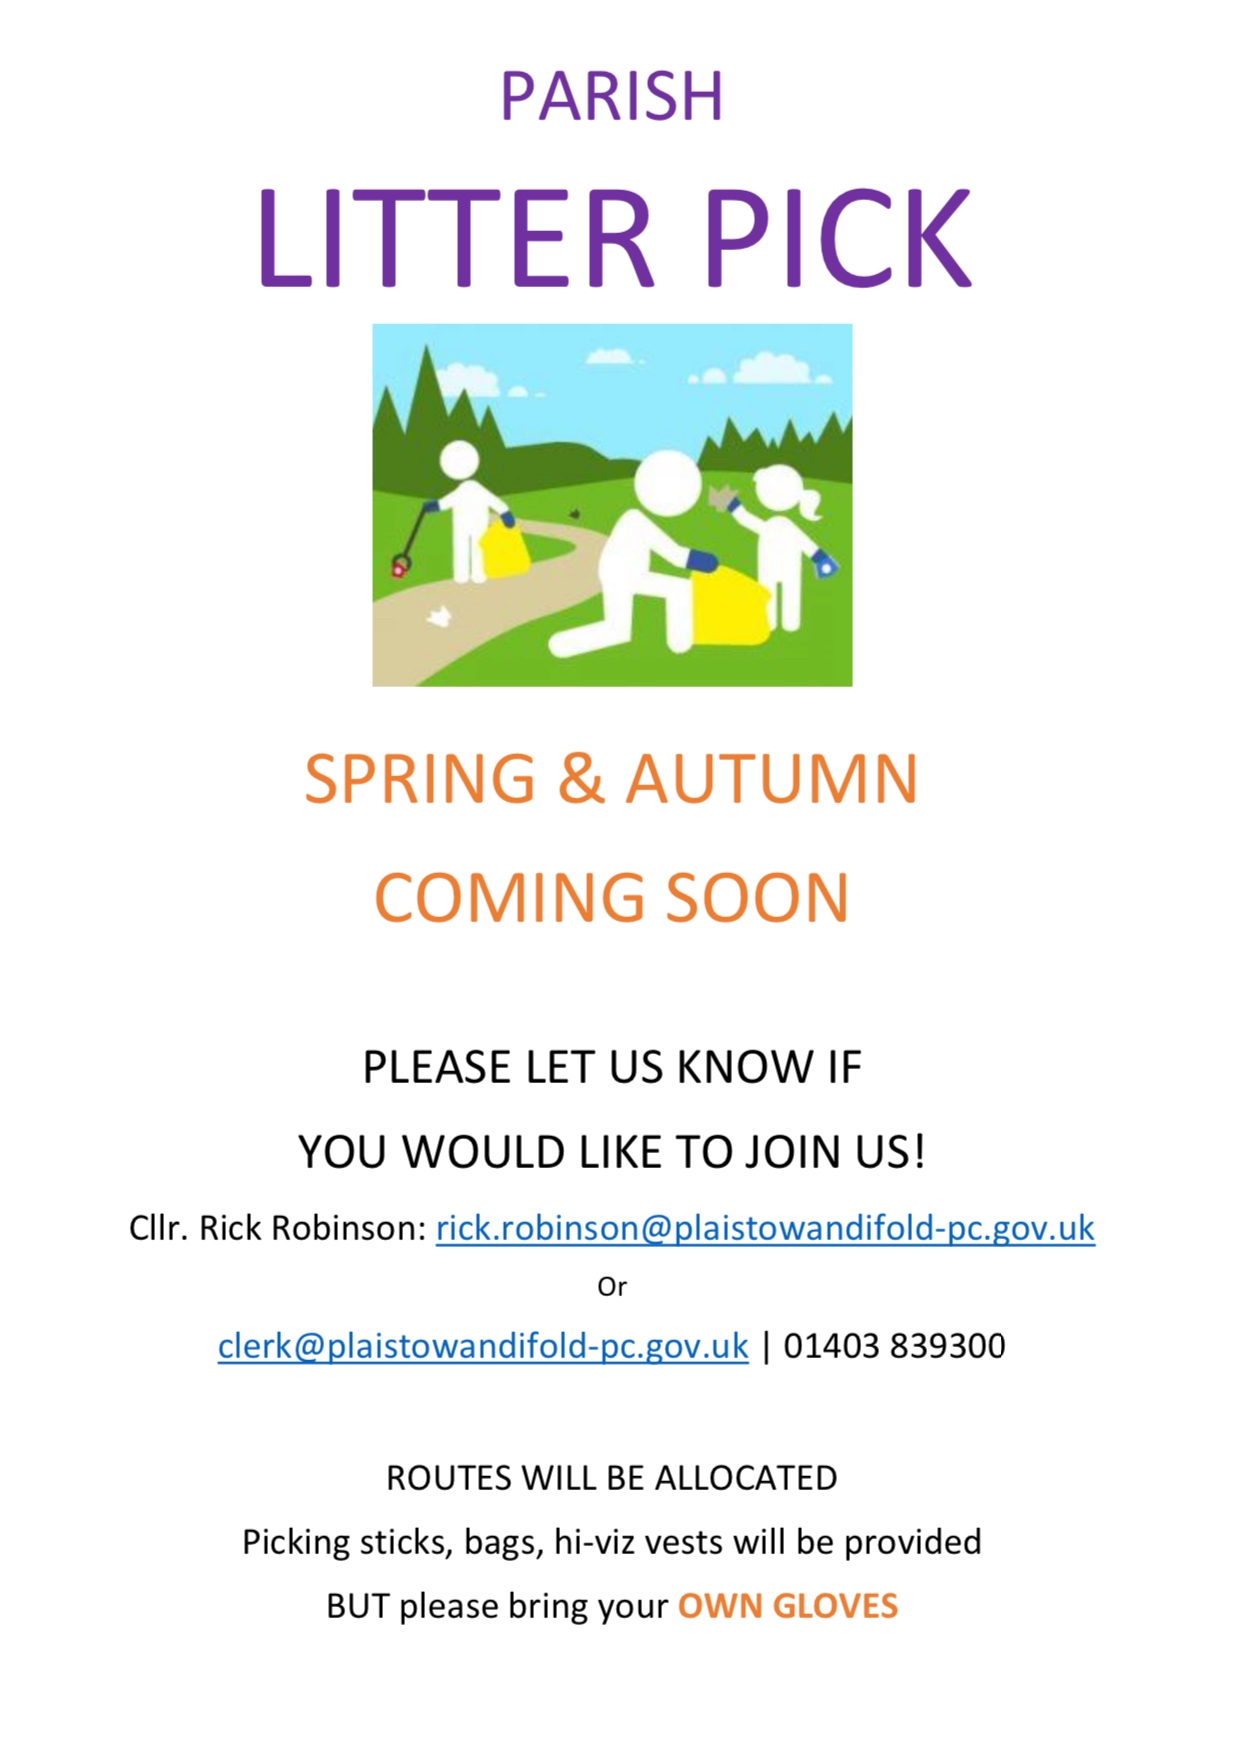 Litter pick "coming soon" poster